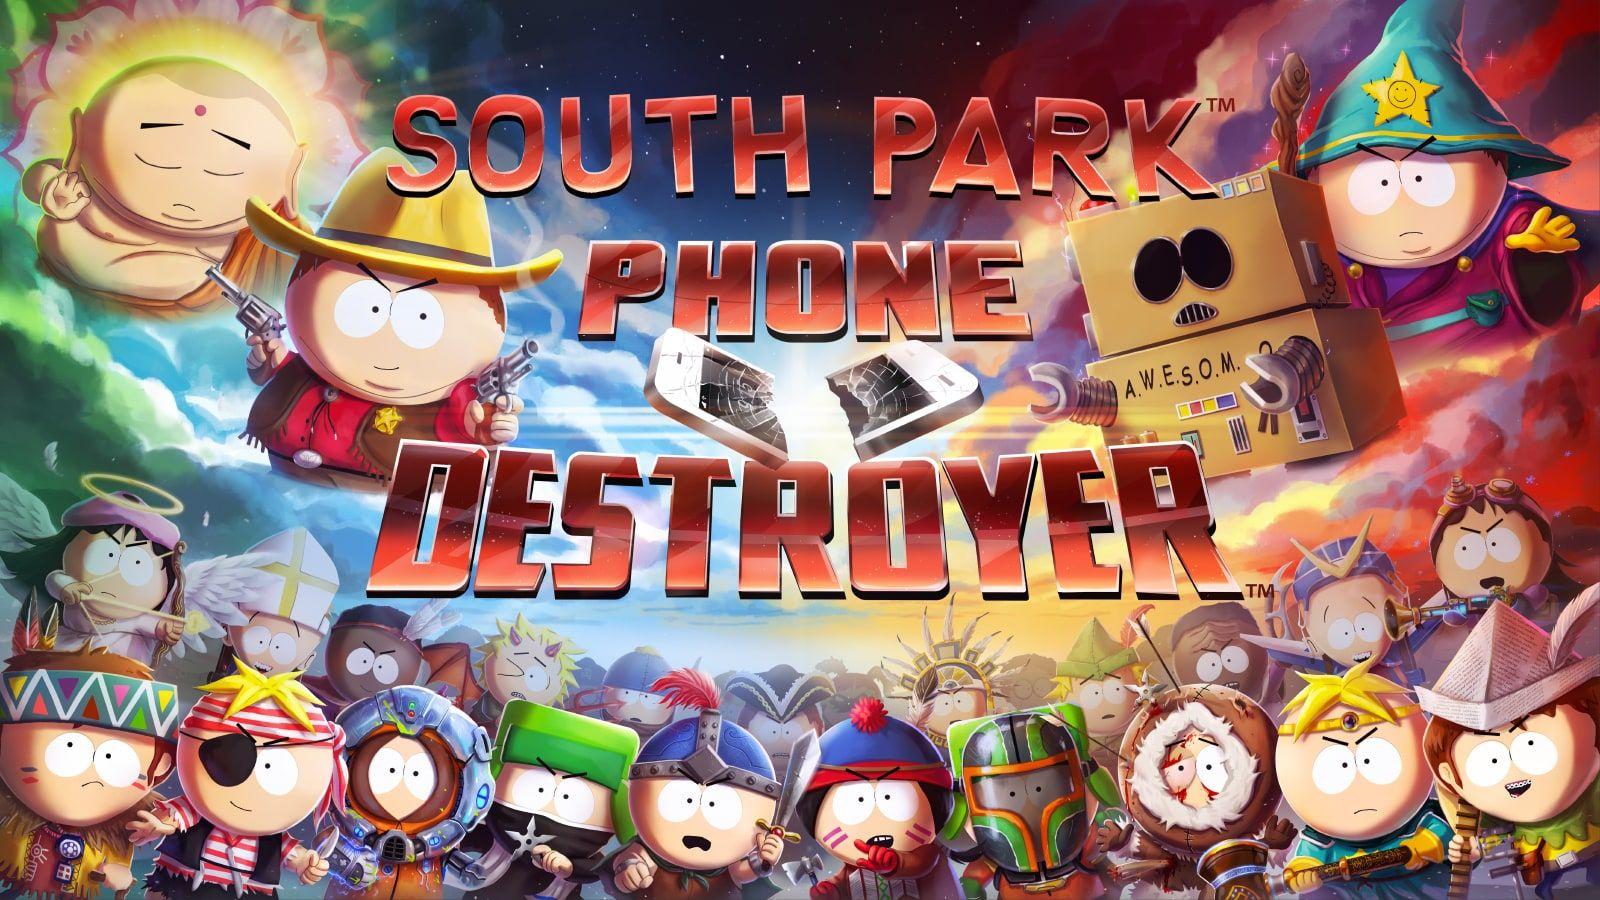 NEW SOUTH PARK: PHONE DESTROYER™ MOBILE GAME REVEALED AT E3. South